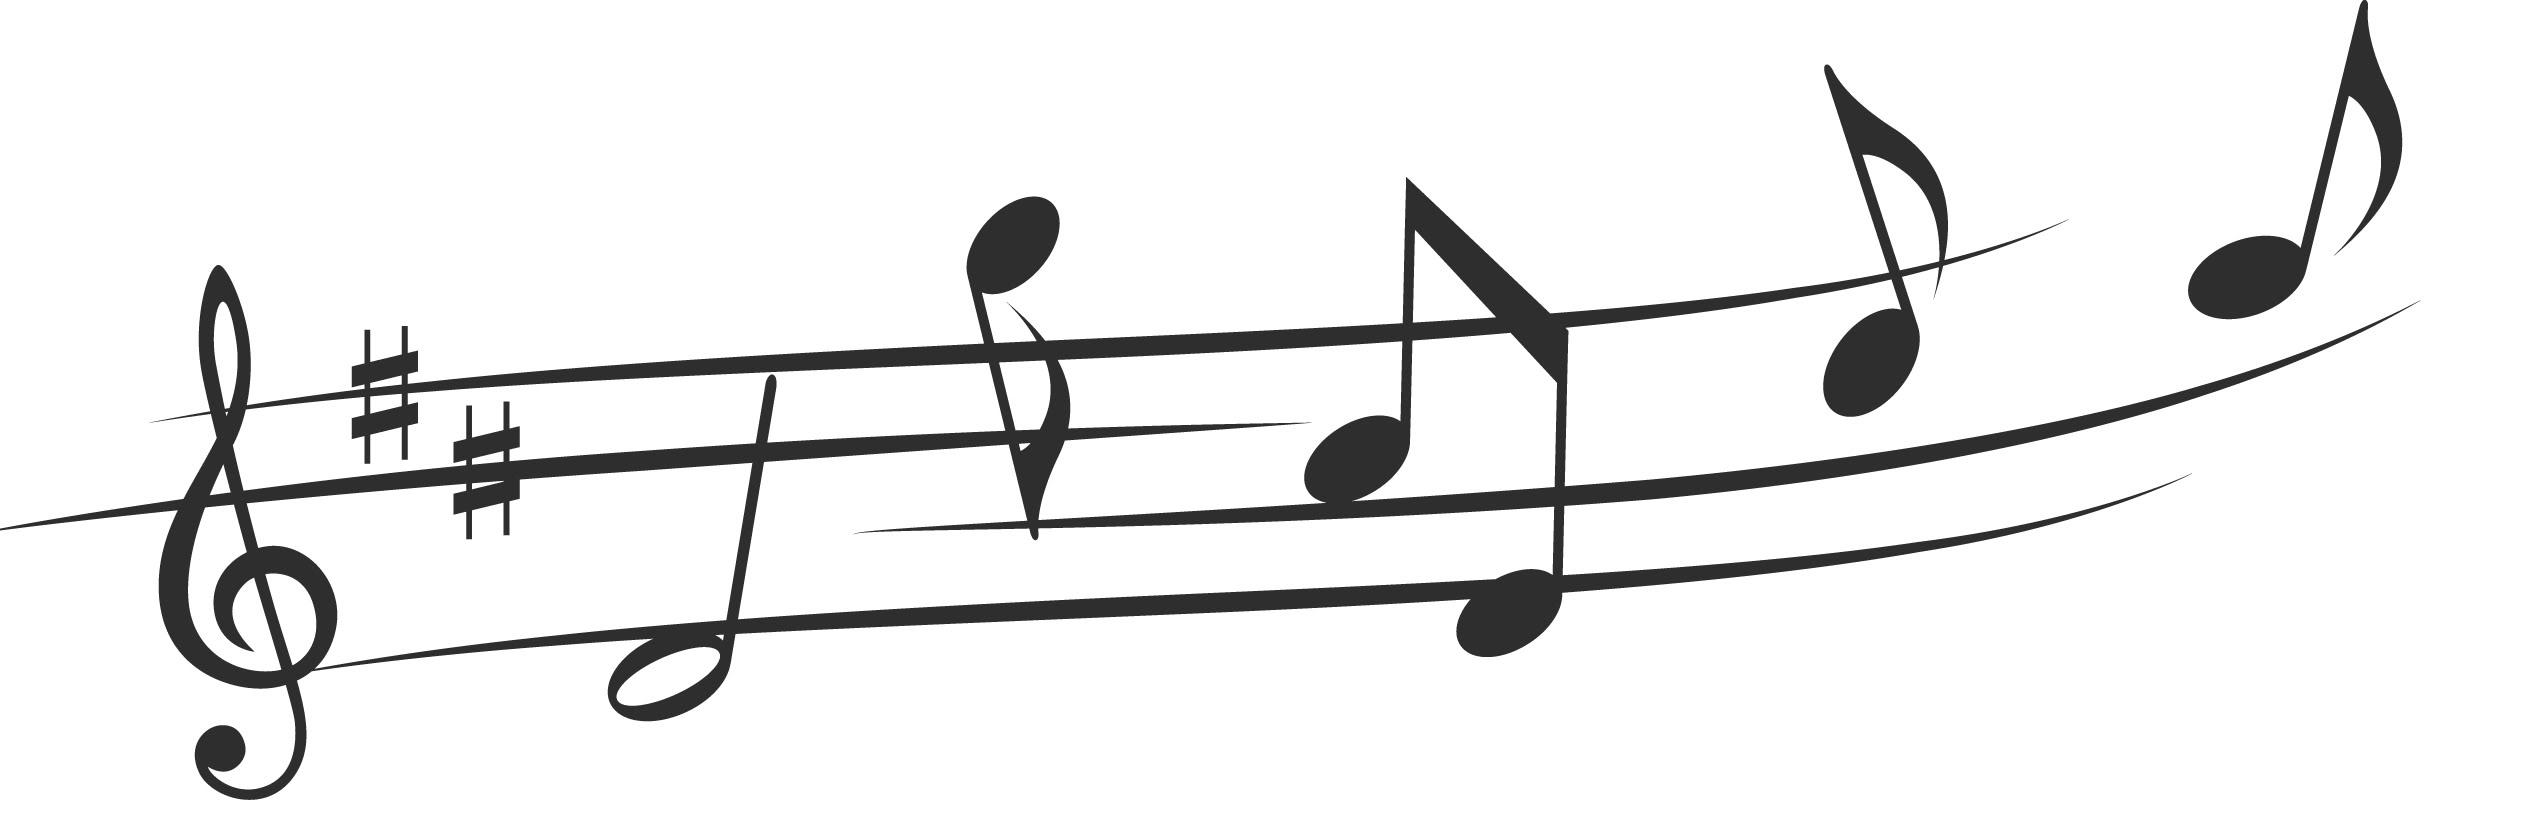 Free MUSICAL NOTES IMAGES, Download Free Clip Art, Free Clip Art